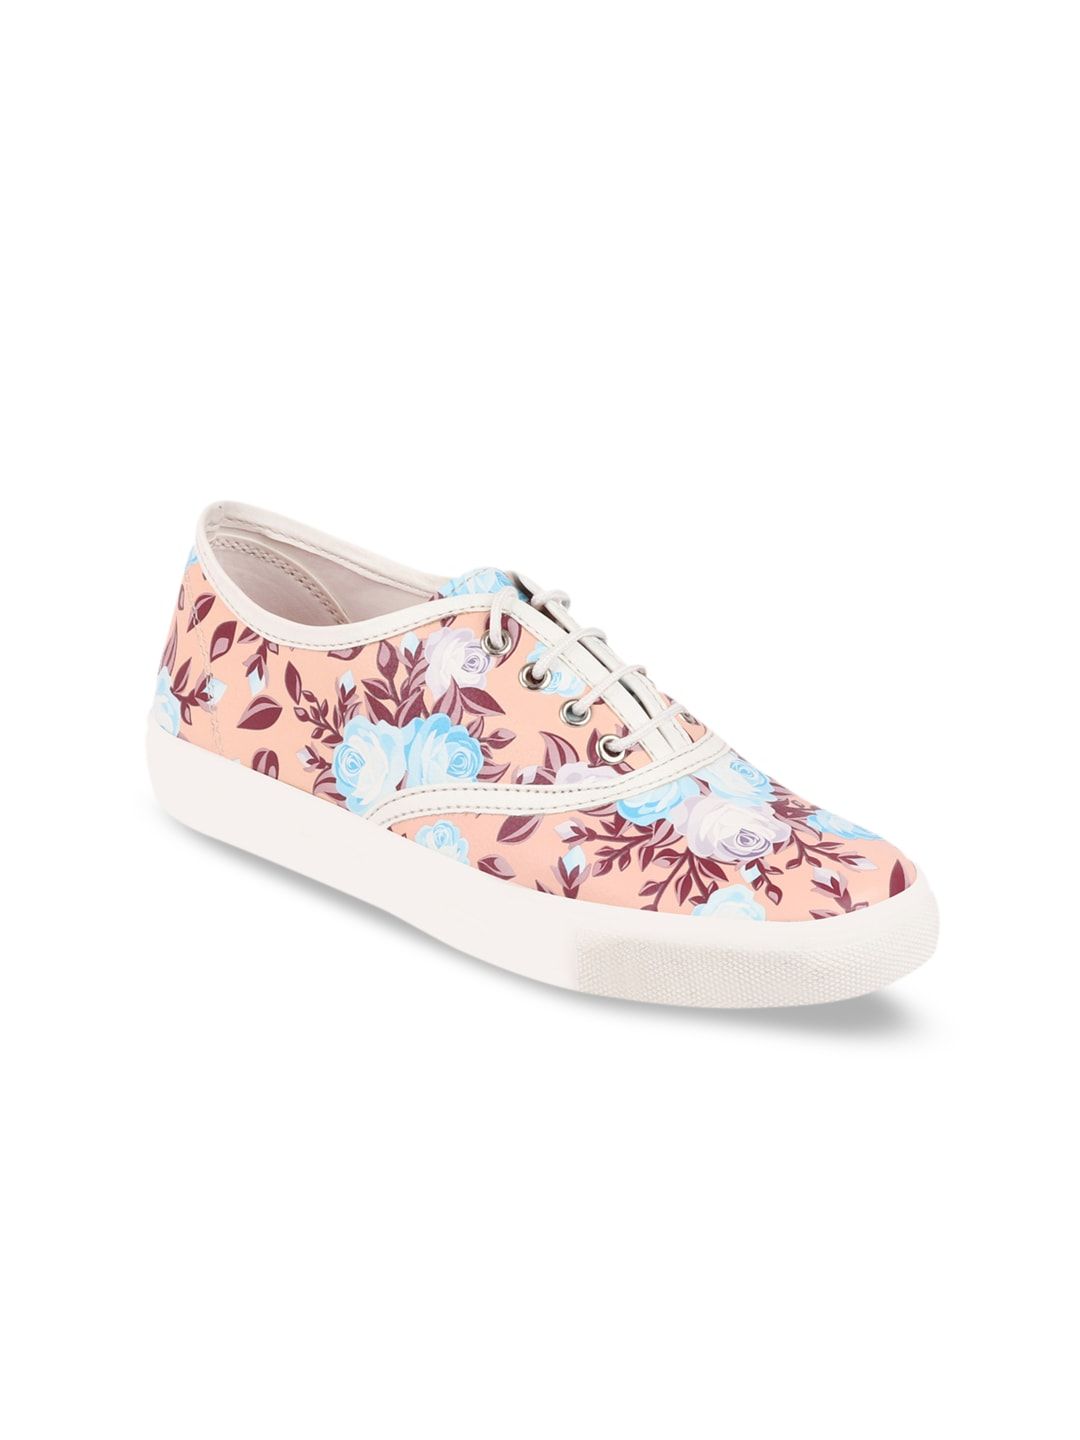 FAUSTO Women Peach Floral Print Sneakers Price in India